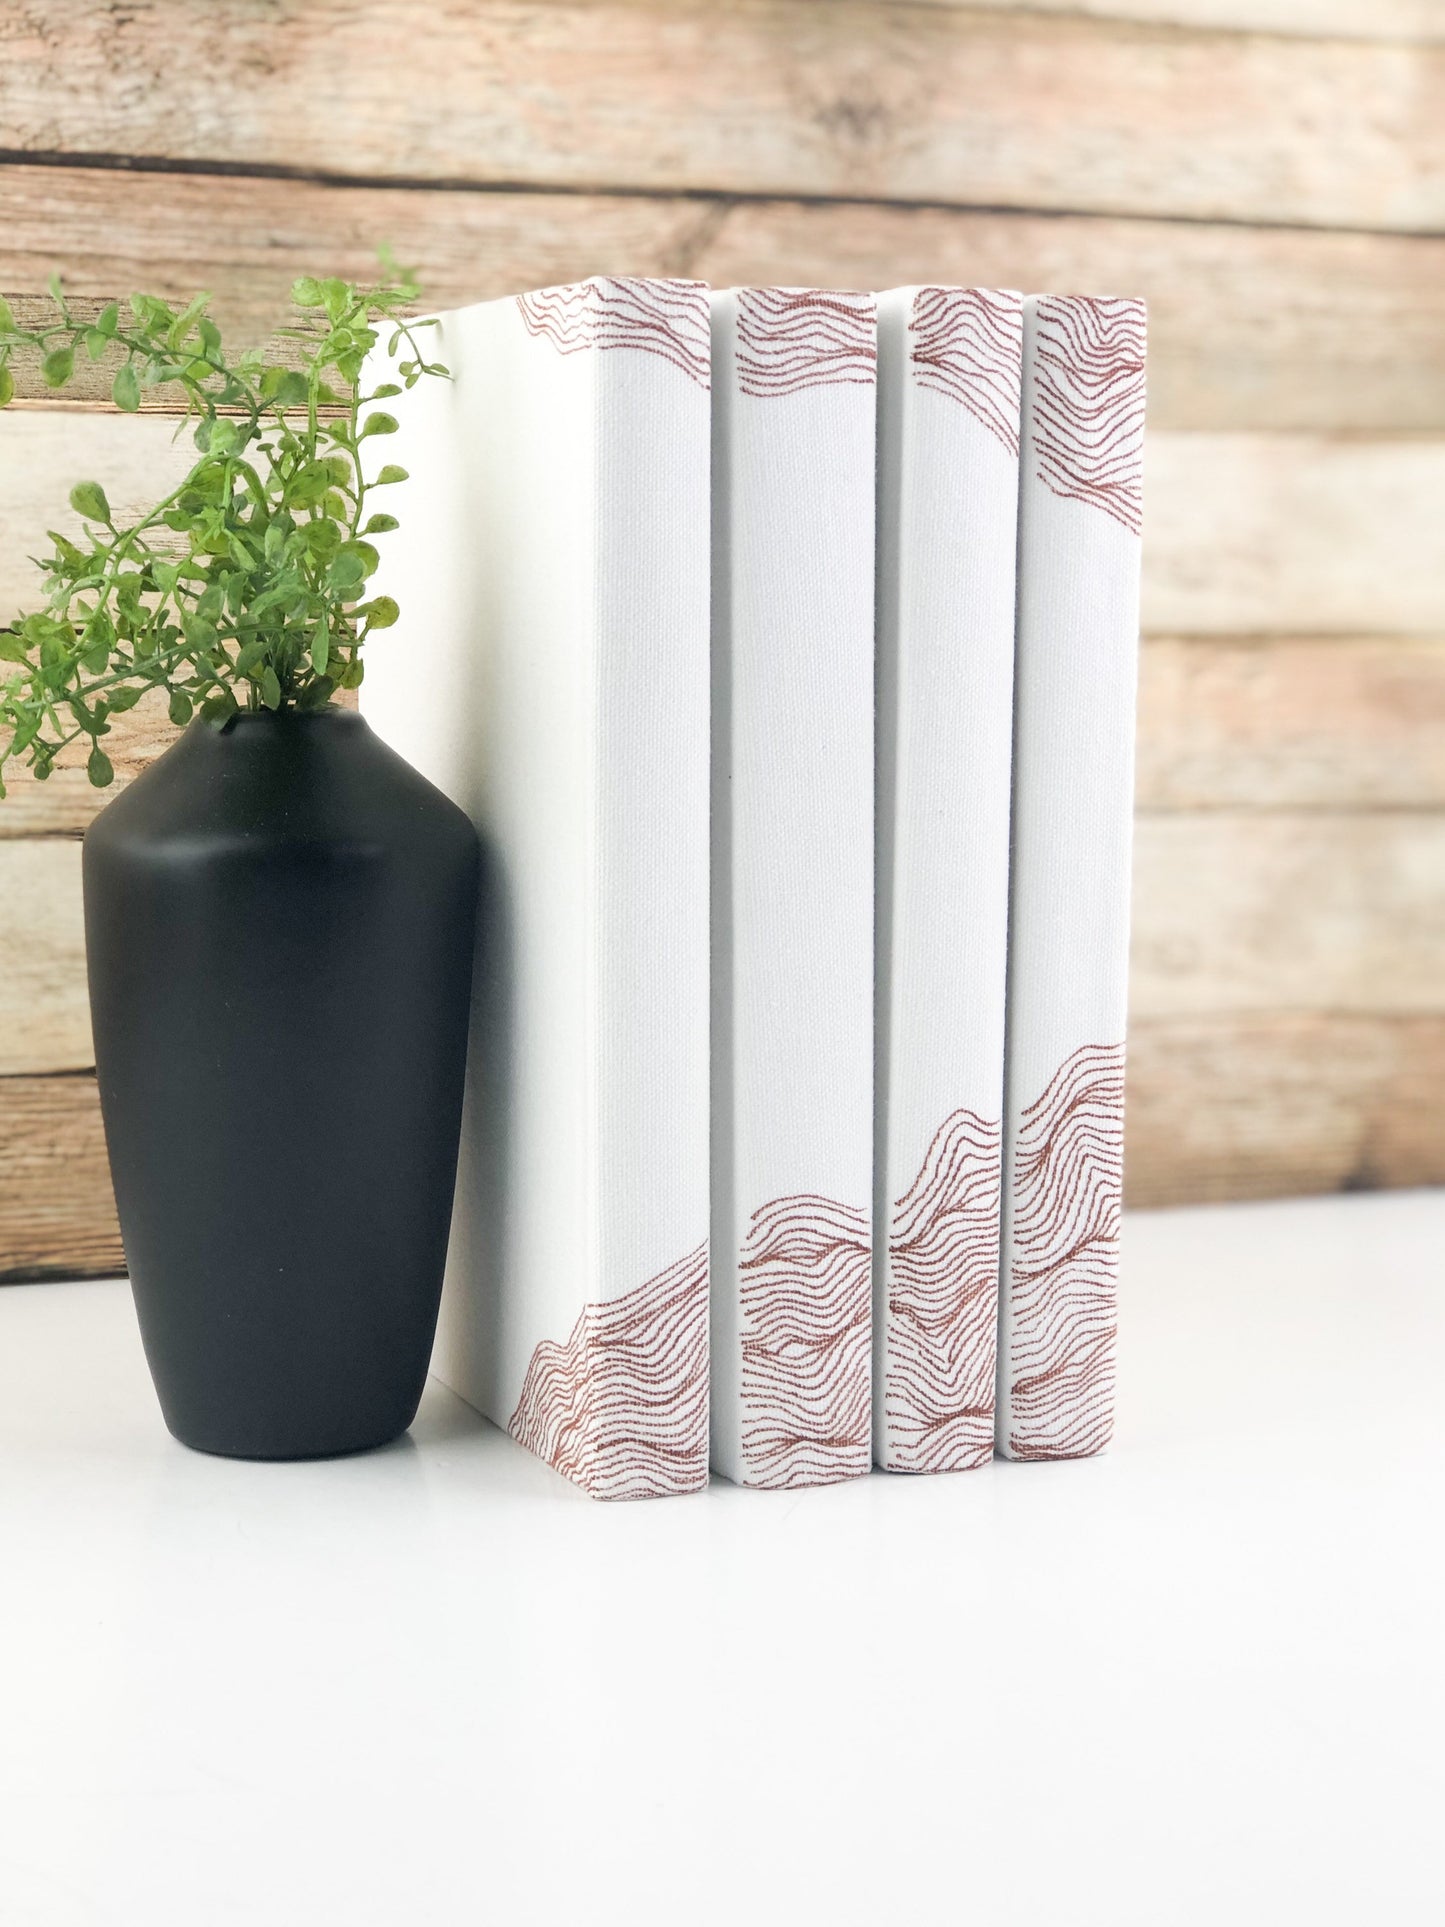 Brown Fabric Covered Books for Home Decor